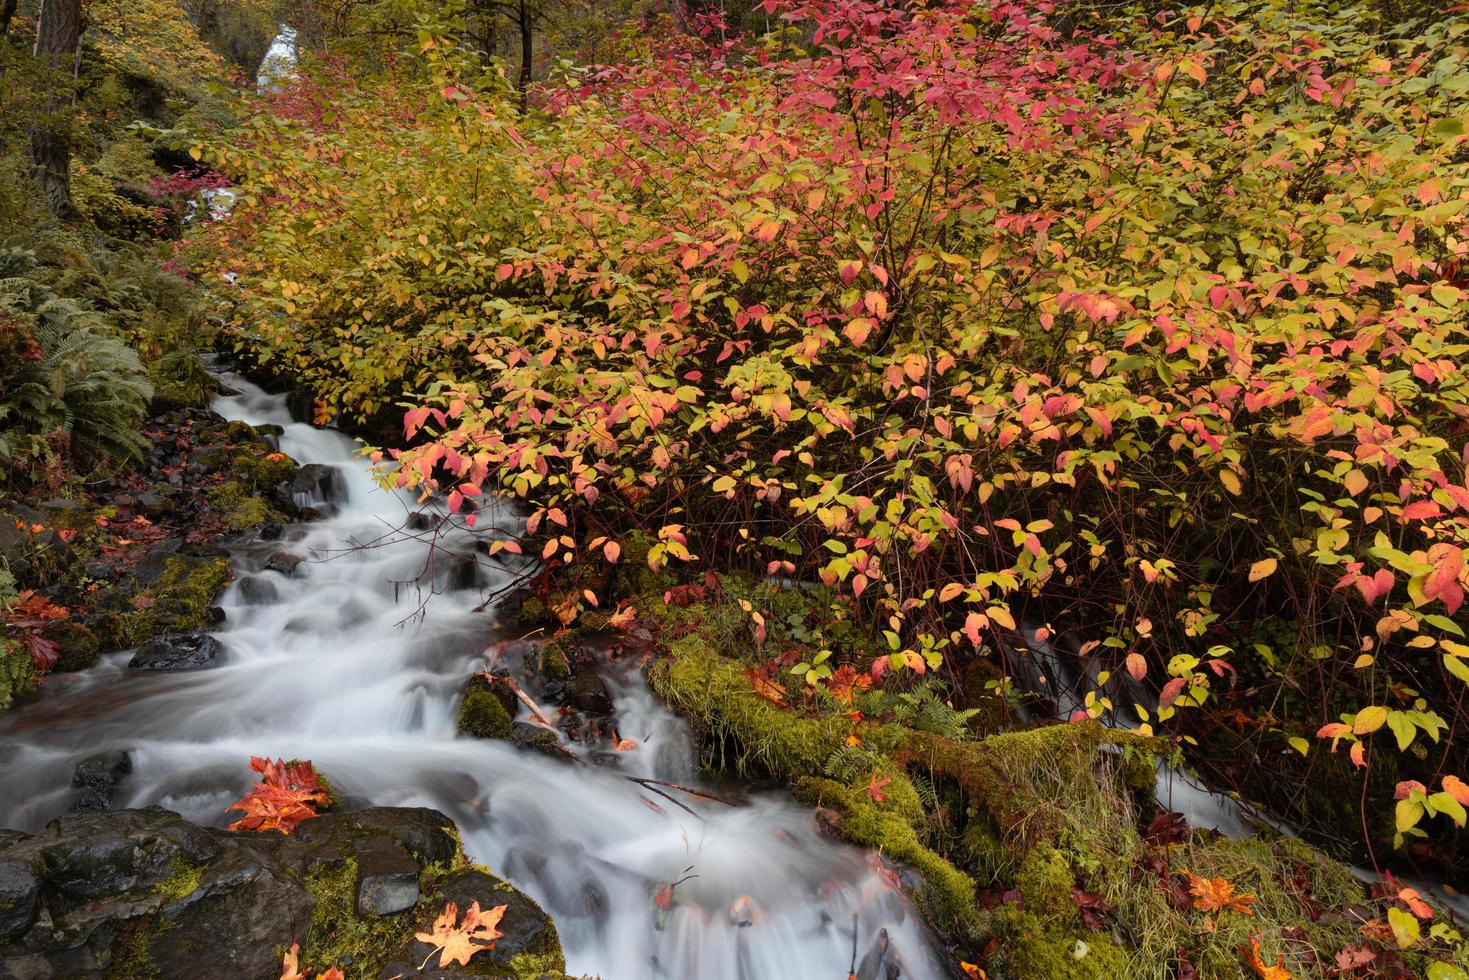 Flowing creek waterfall surrounded by vibrant fall foliage photo